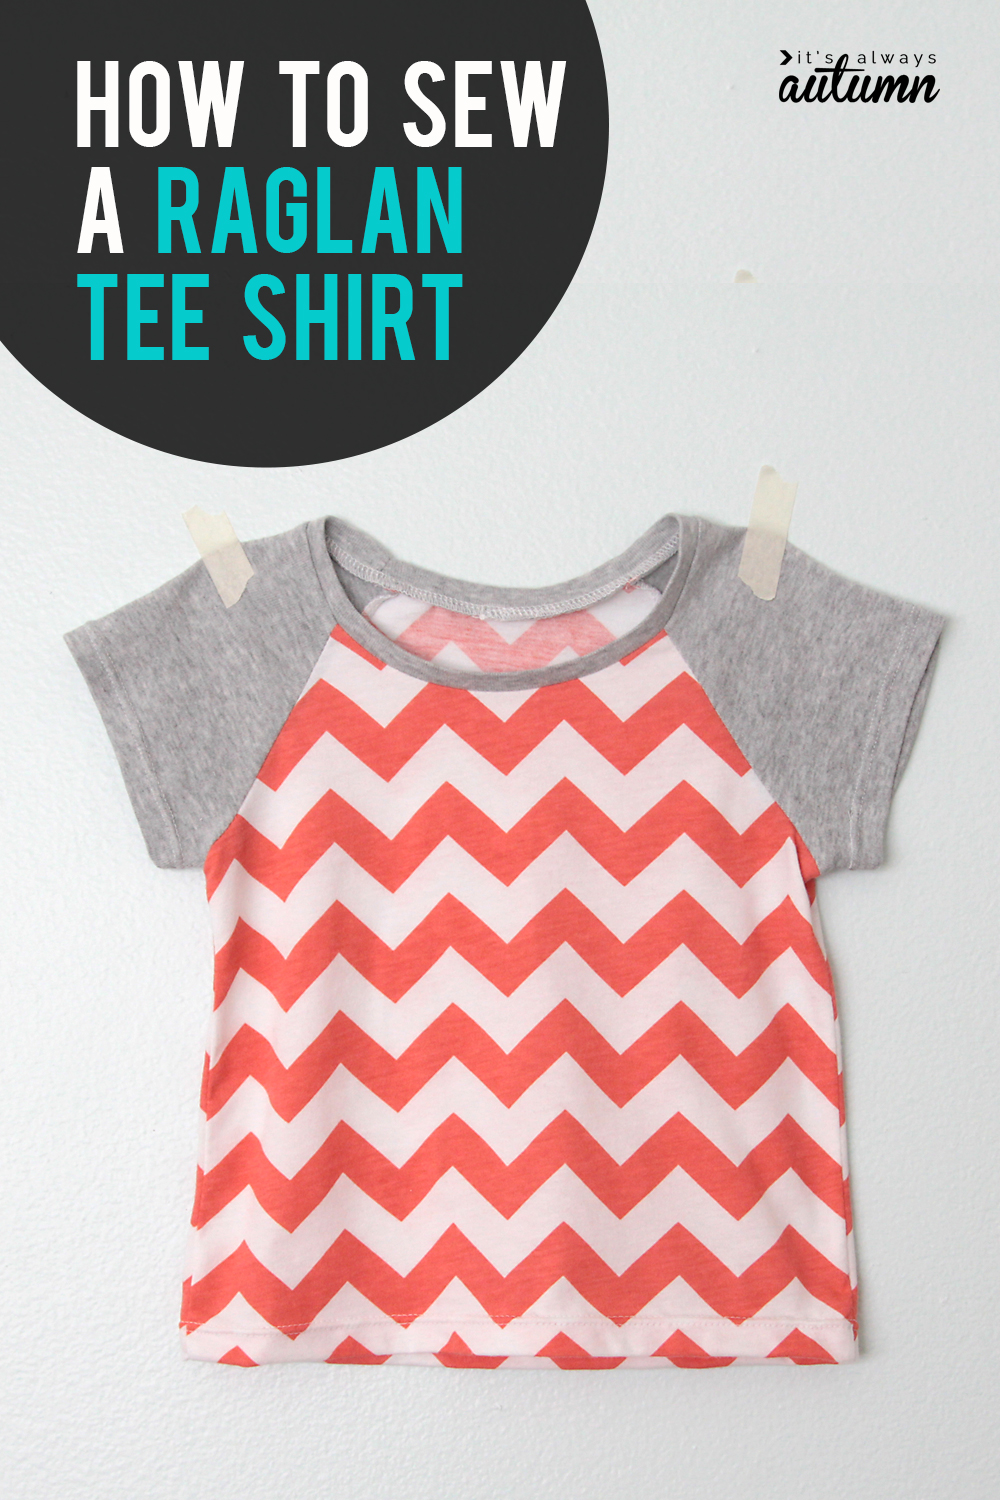 how to pattern draft and sew a raglan tee in any size - It's